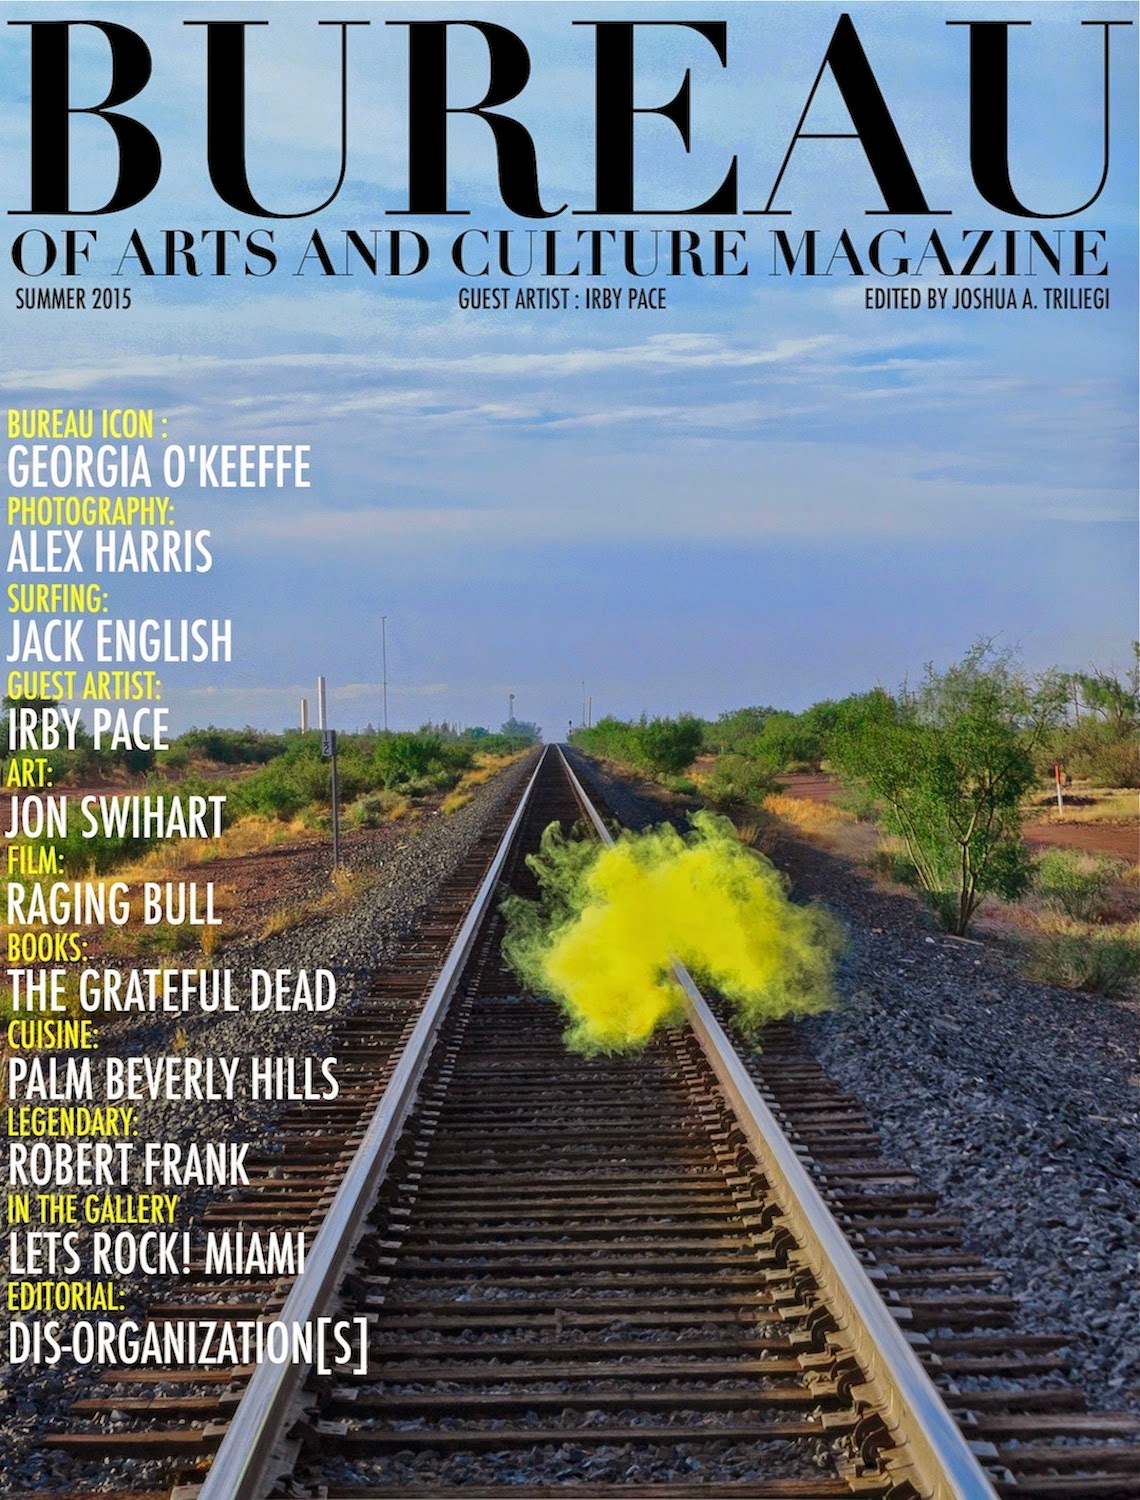 2015 SUMMER EDITION FREE TAP THE COVER AND GET A DOWNLOAD 200+ PAGES...